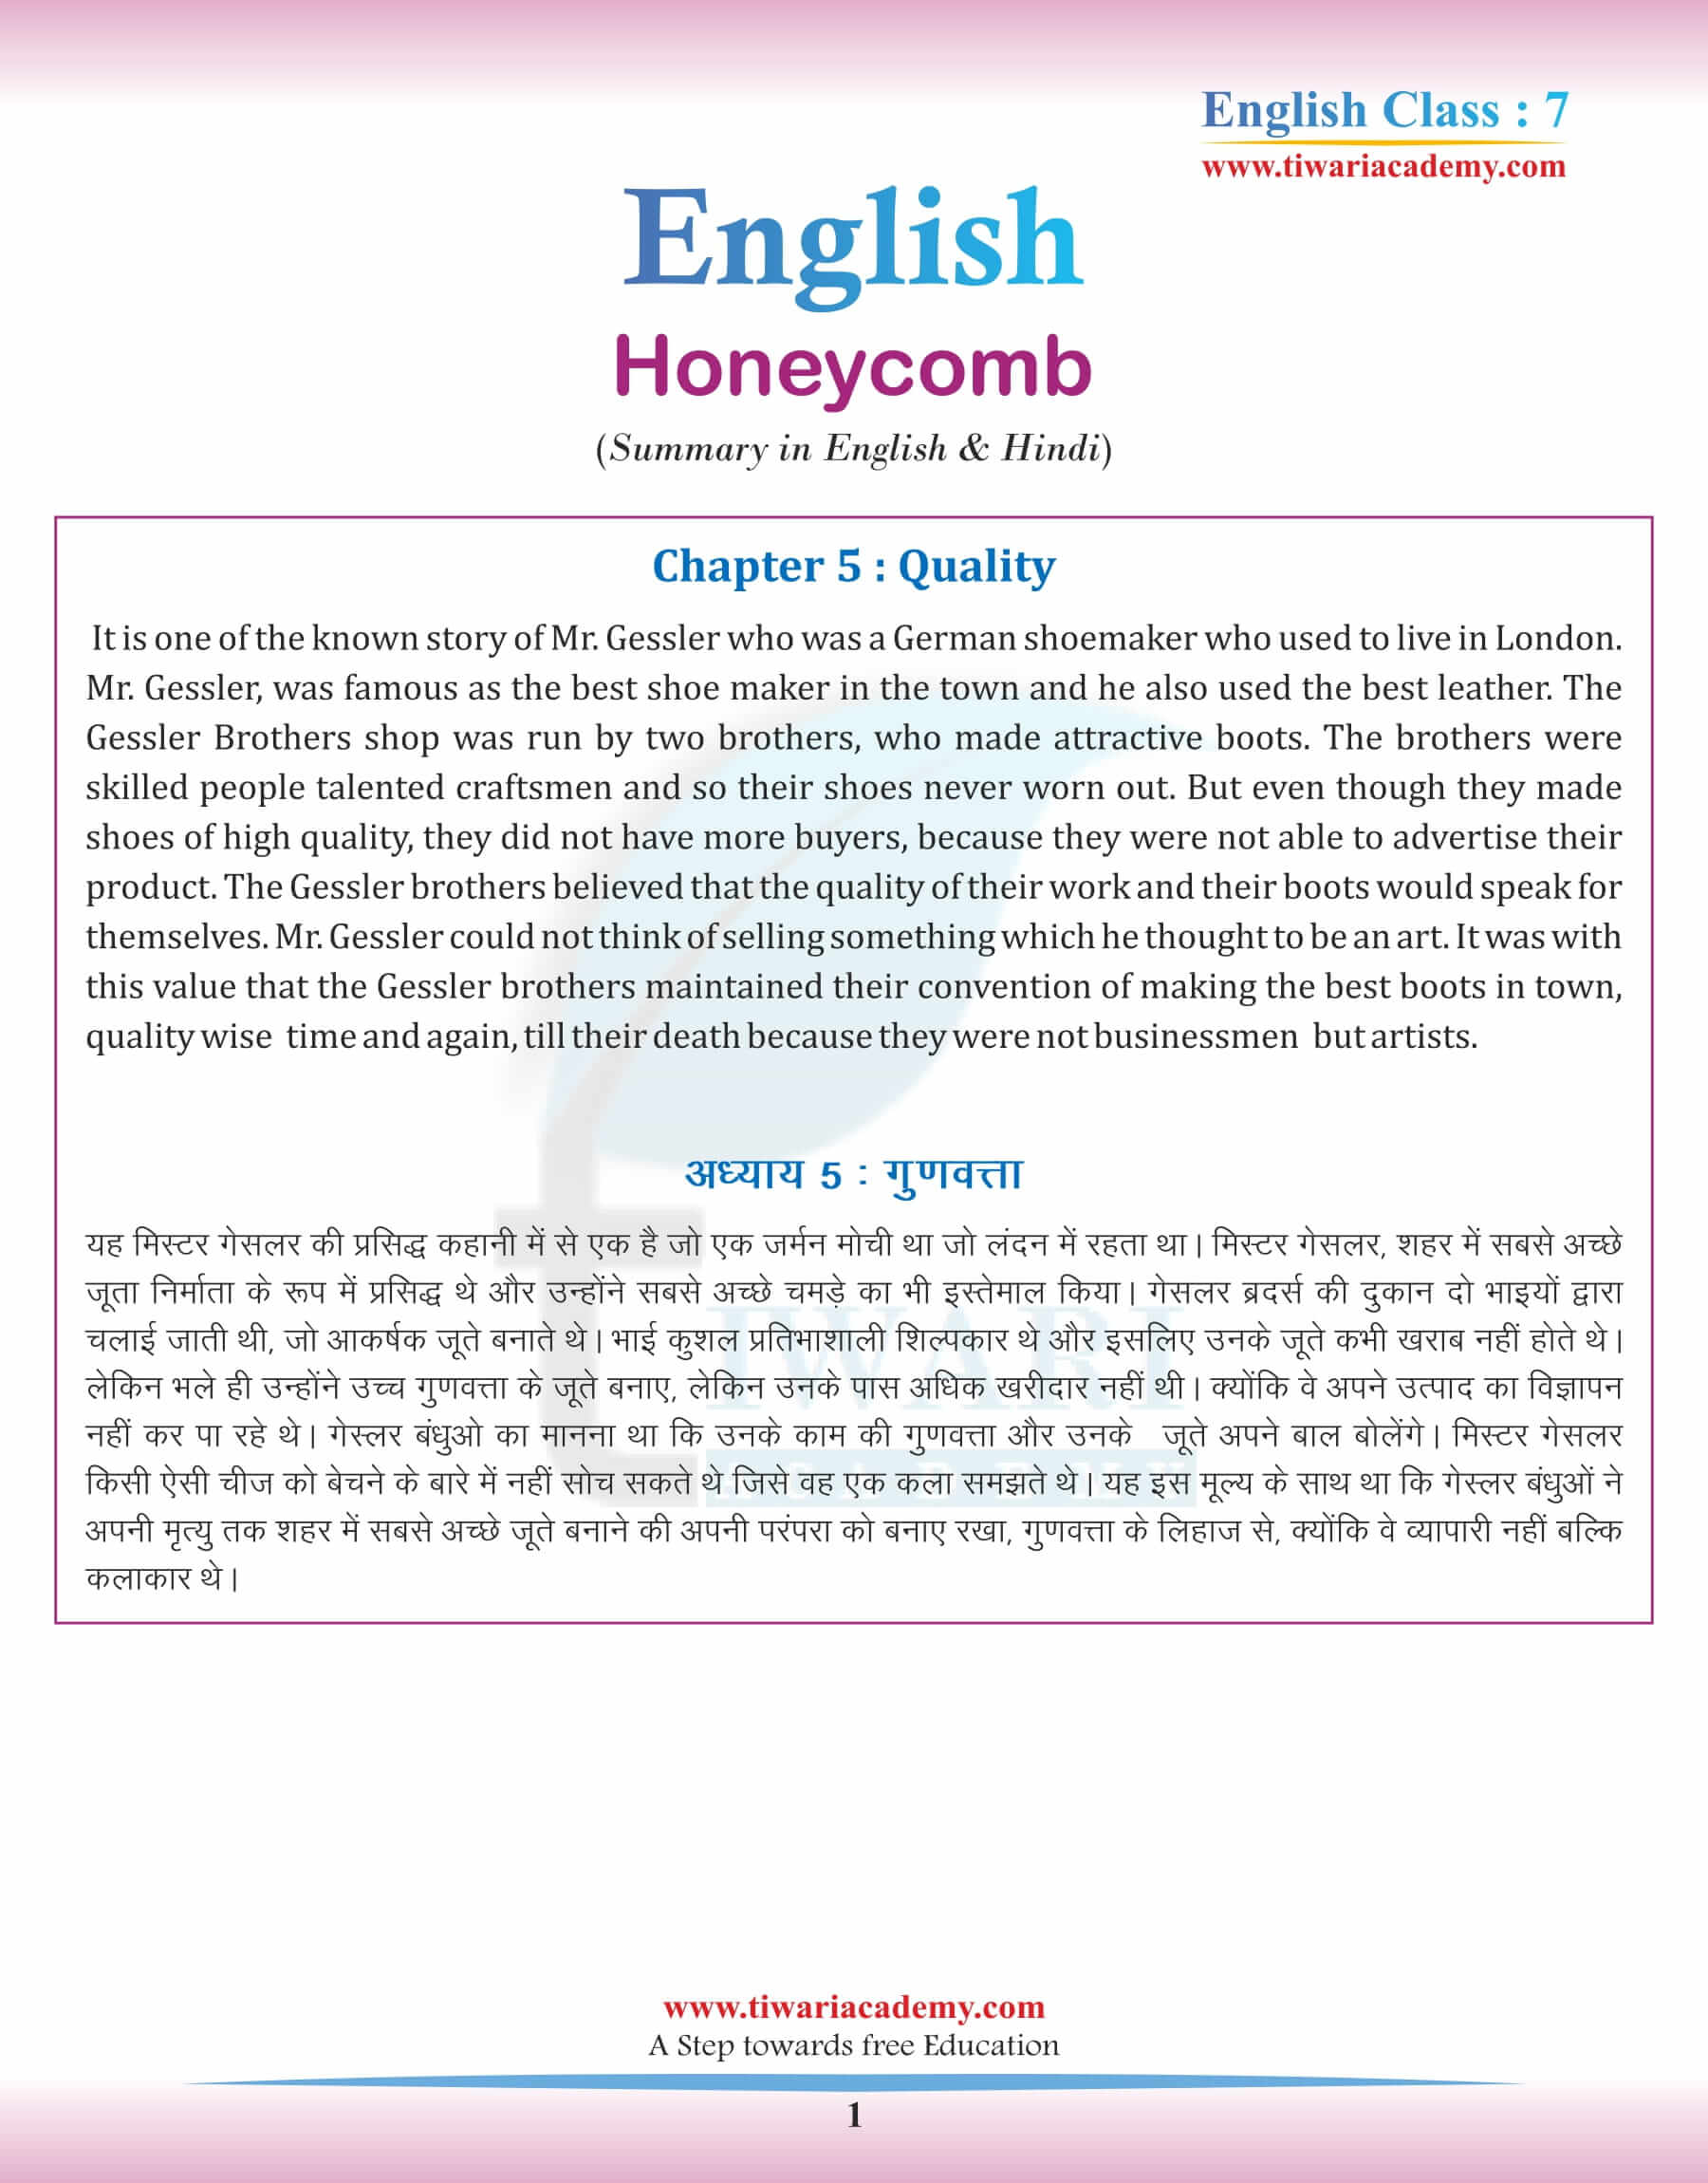 Class 7 English Chapter 5 Summary in Hindi and English